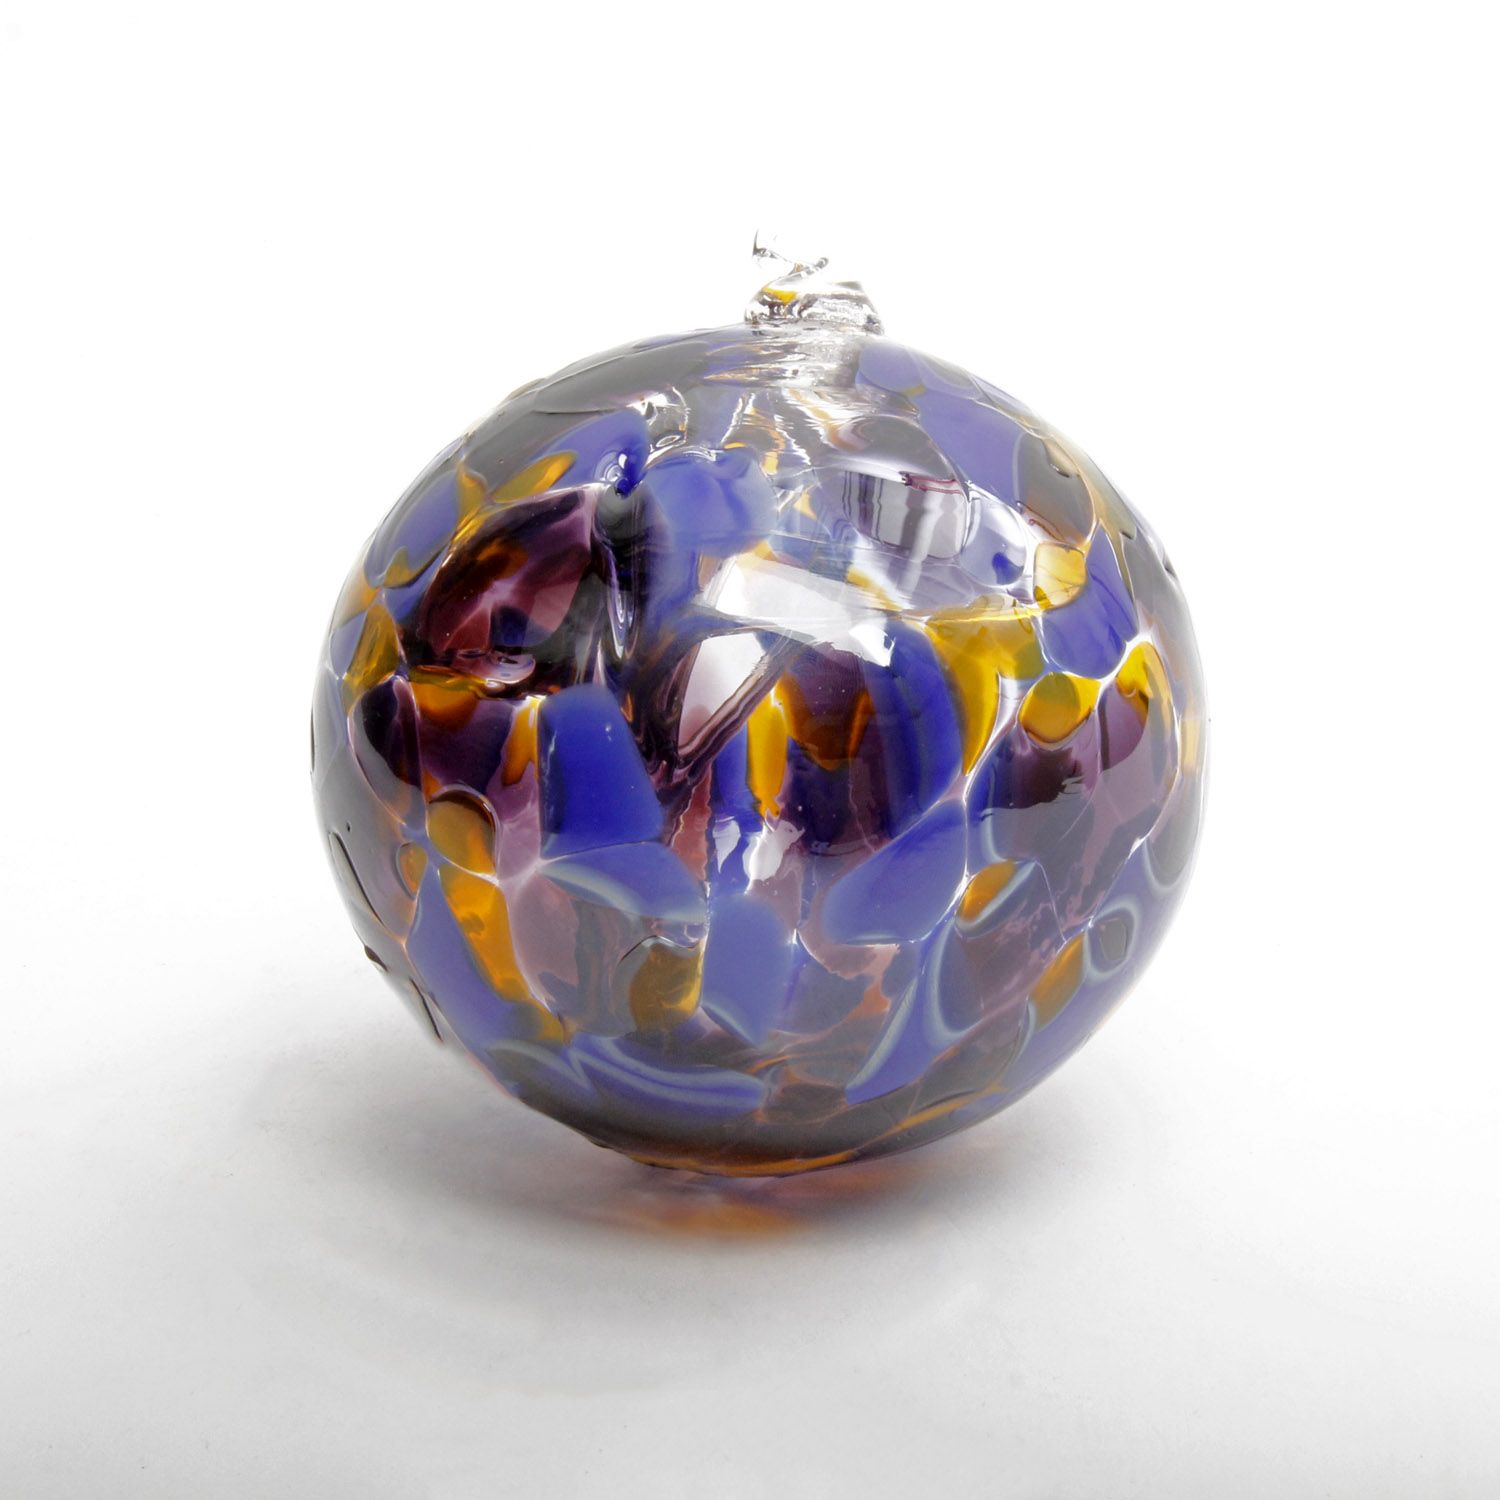 Gordon Boyd: Small Witchball – Starry Night Product Image 3 of 4